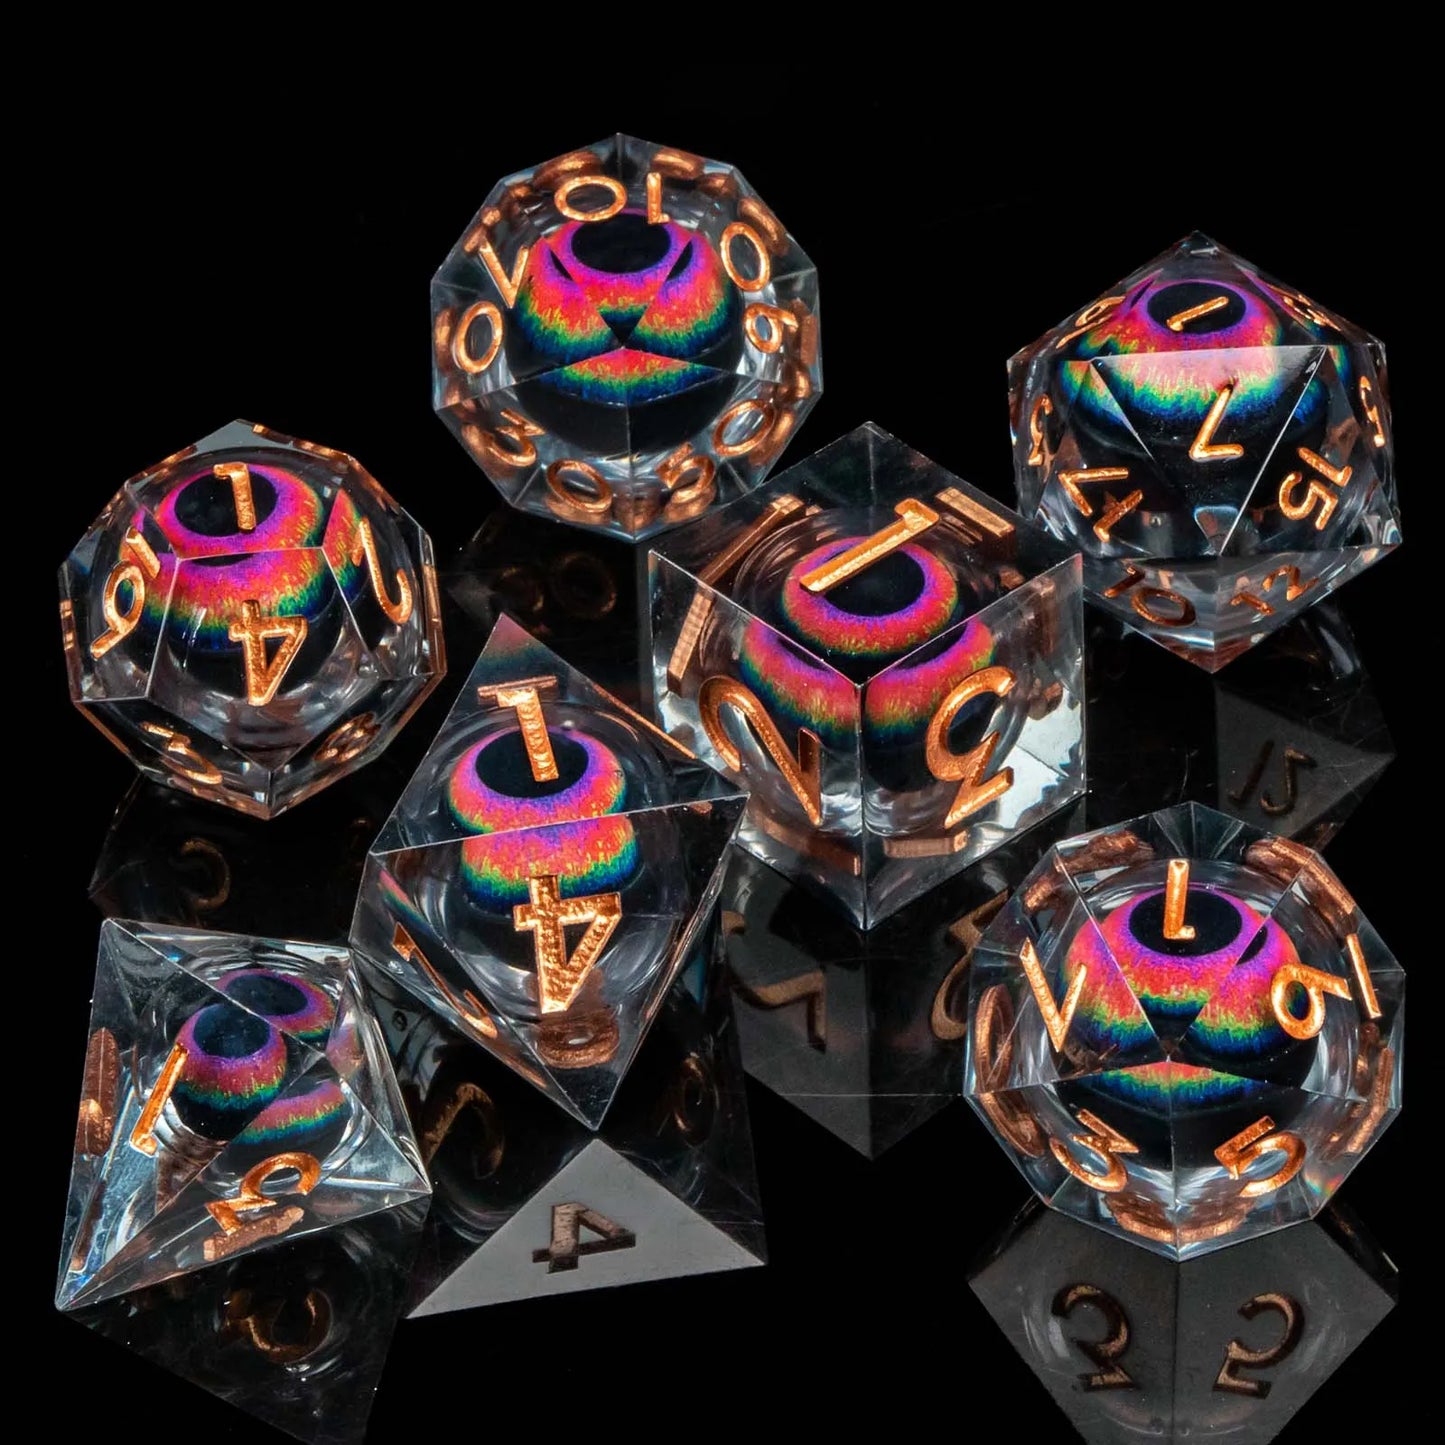 DND Eye Liquid Flow Core Resin D&D Dice Set For D and D Dungeon and Dragon Pathfinder Table Role Playing Game Polyhedral Dice AZ01